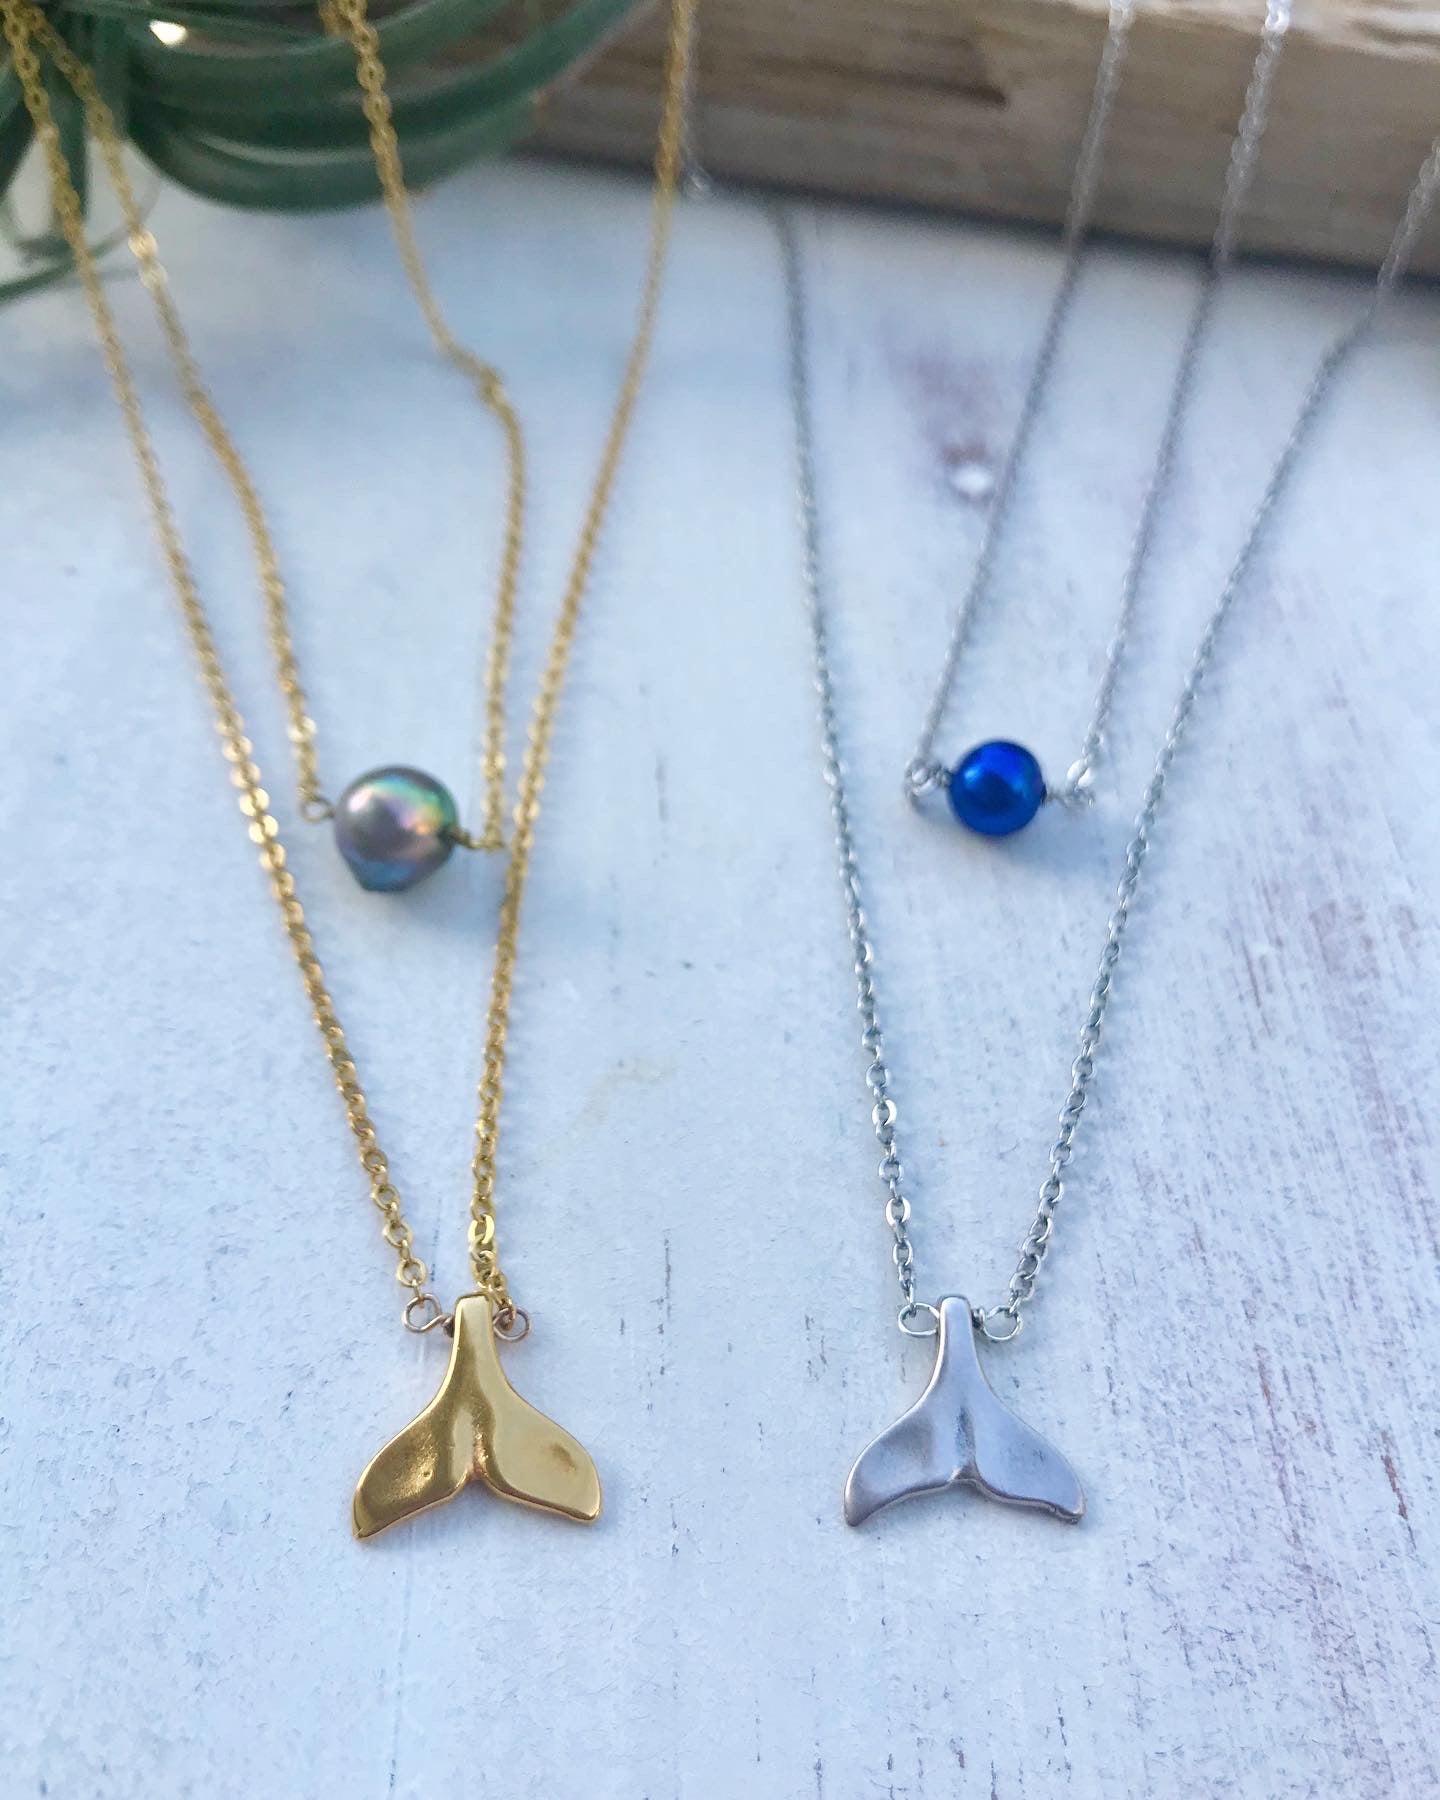 Silver or Gold mermaid tail necklace